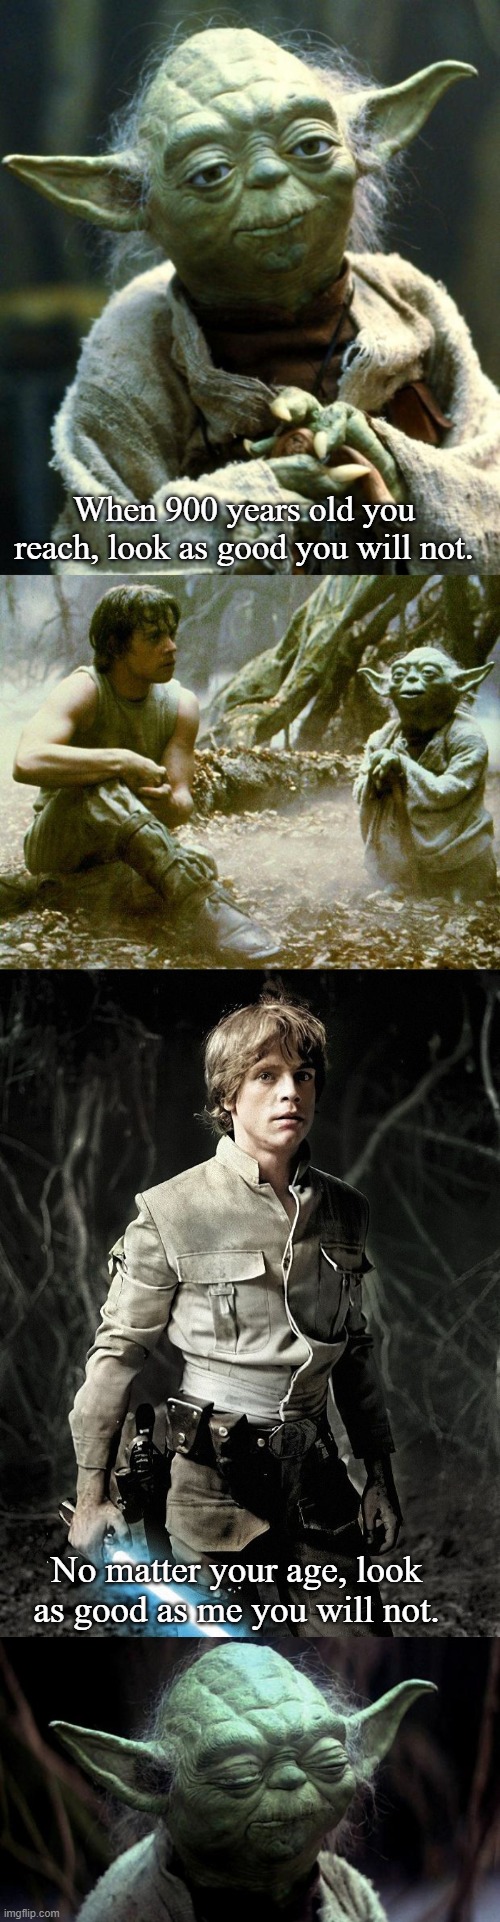 Sassy Comeback Luke |  When 900 years old you reach, look as good you will not. No matter your age, look as good as me you will not. | image tagged in memes,star wars yoda,dagobah luke and yoda,star wars | made w/ Imgflip meme maker